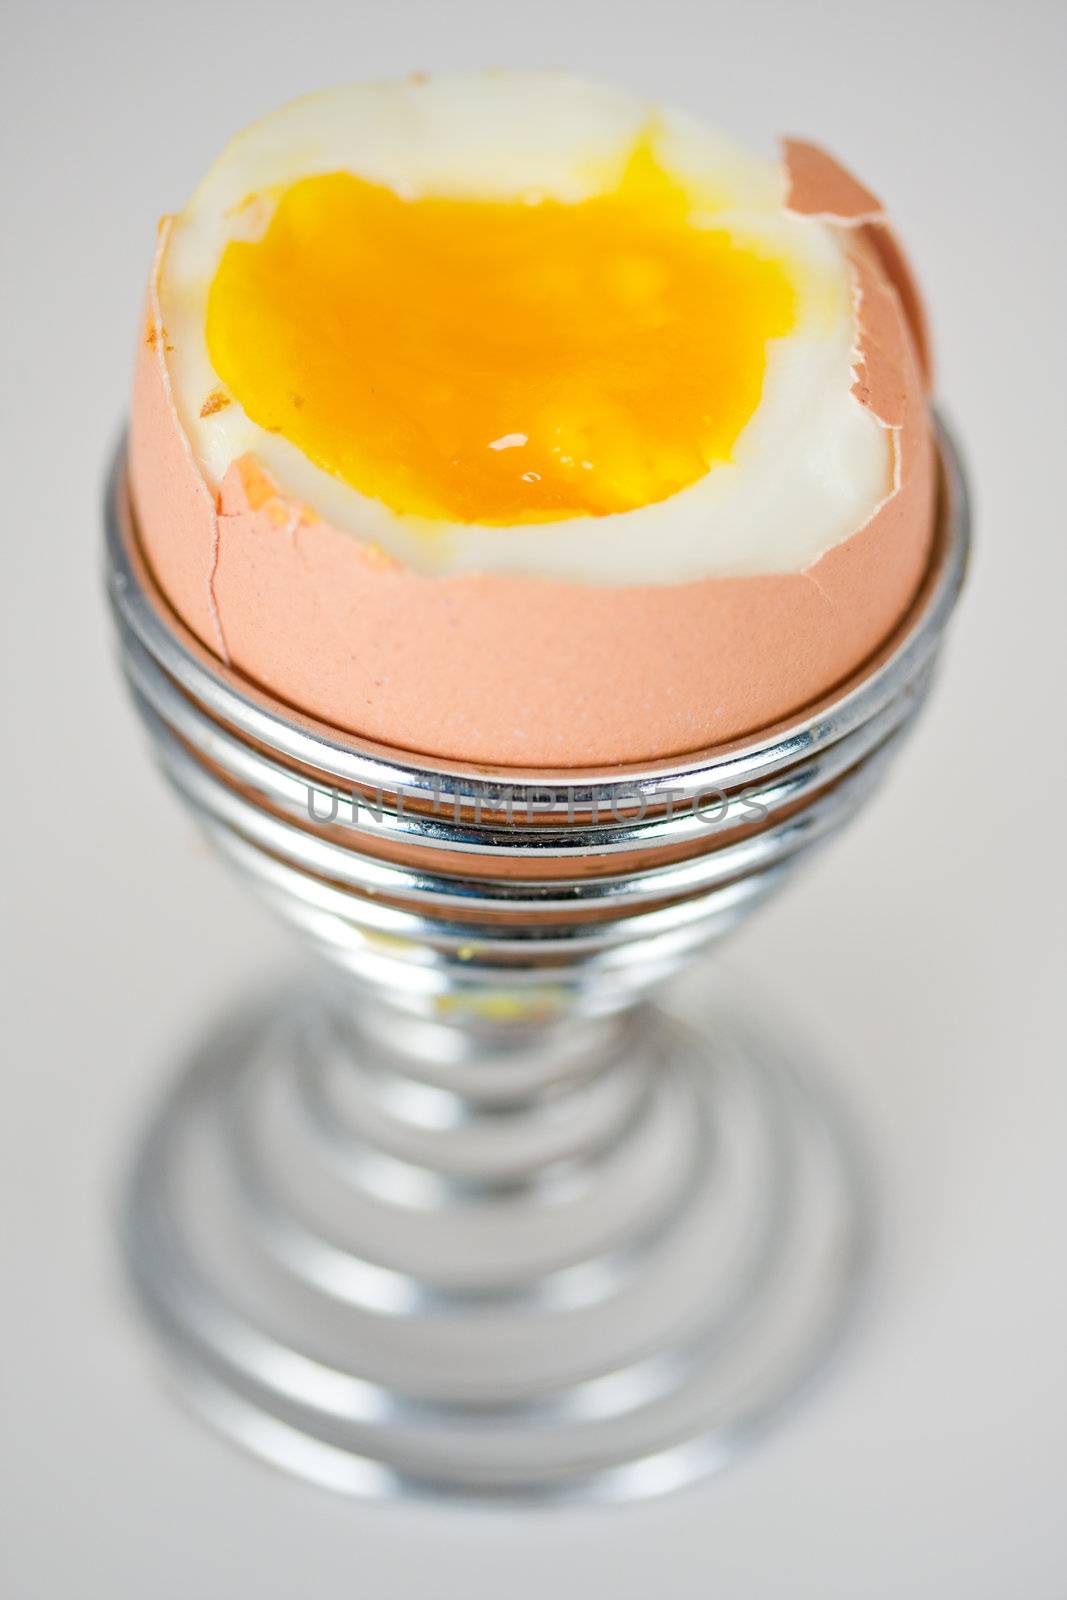 brown egg in an eggcup on white background by bernjuer